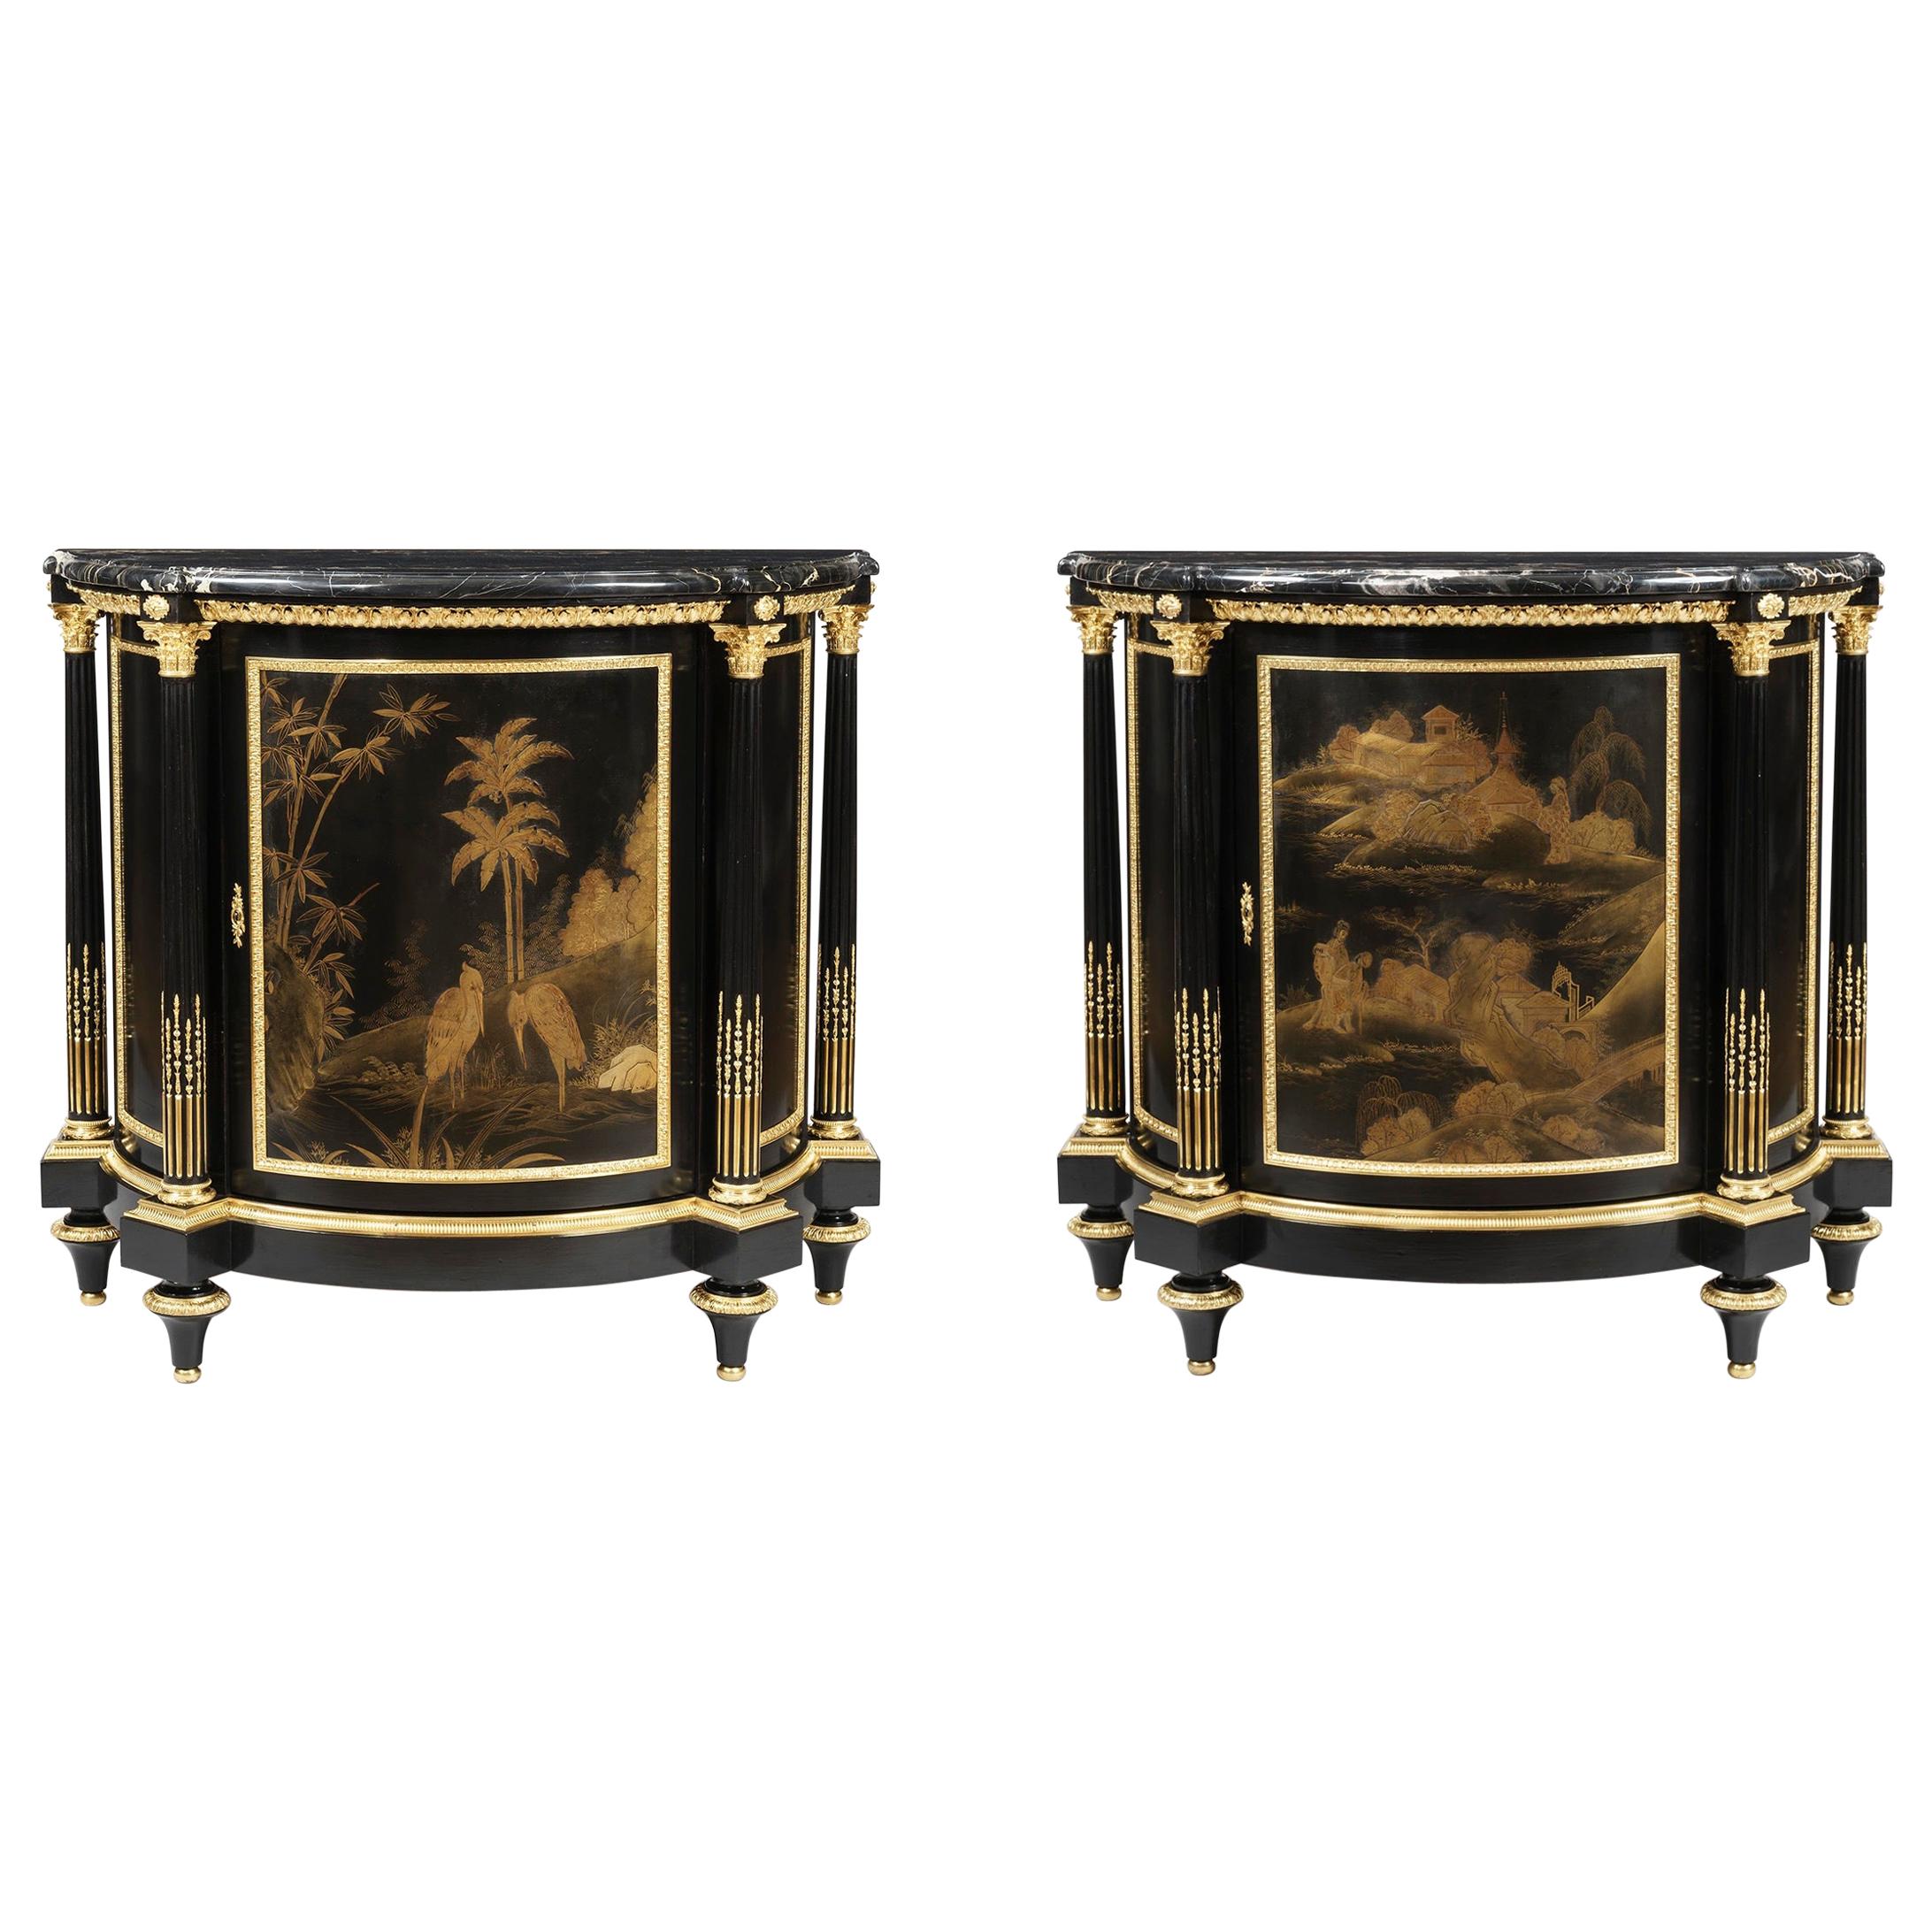 Pair of Lacquer and Ormolu-Mounted Cabinets in the Louis XVI Manner by Millet For Sale